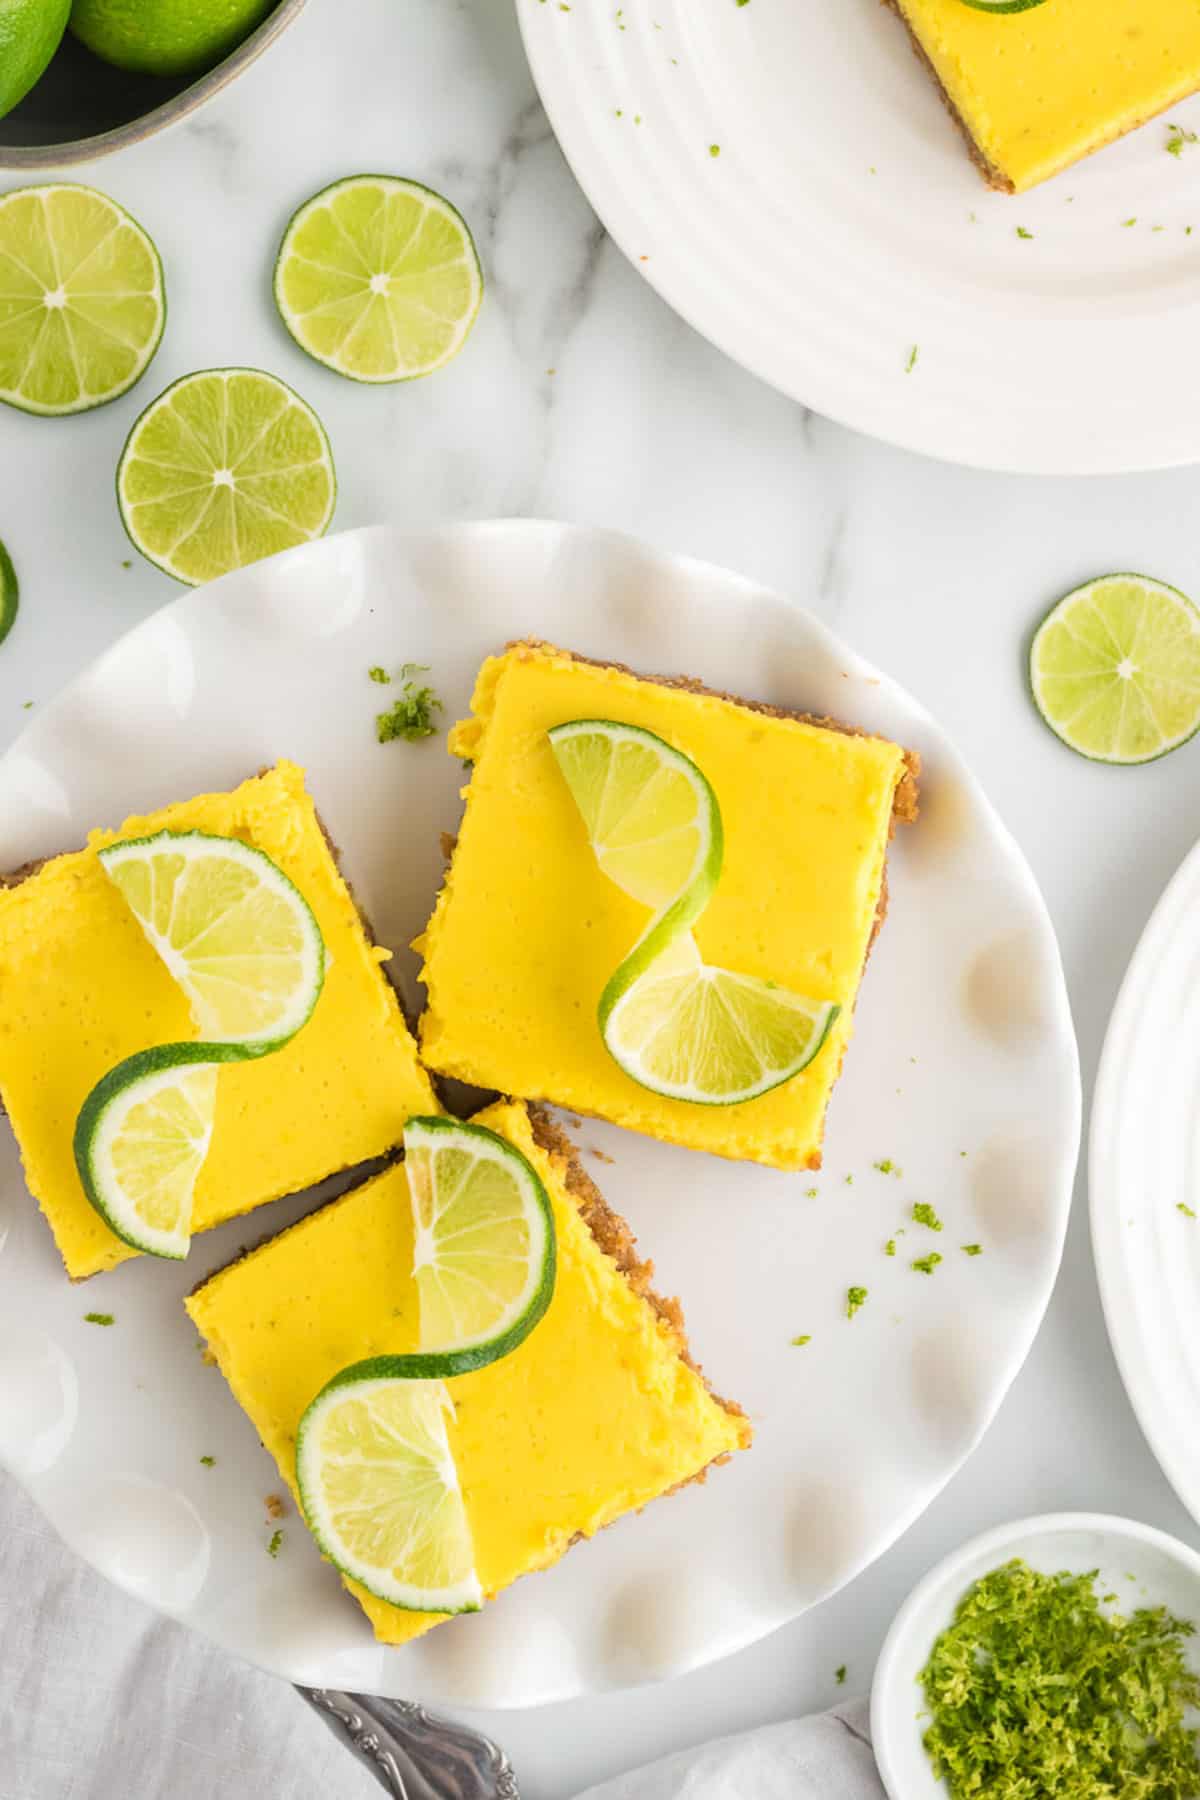 3 square key lime bars on a plate topped with fresh lime slices and sprinkled with lime zest, surrounded by a bowl of limes, another plate with a key lime bar on it more lime slices and a bowl of lime zest